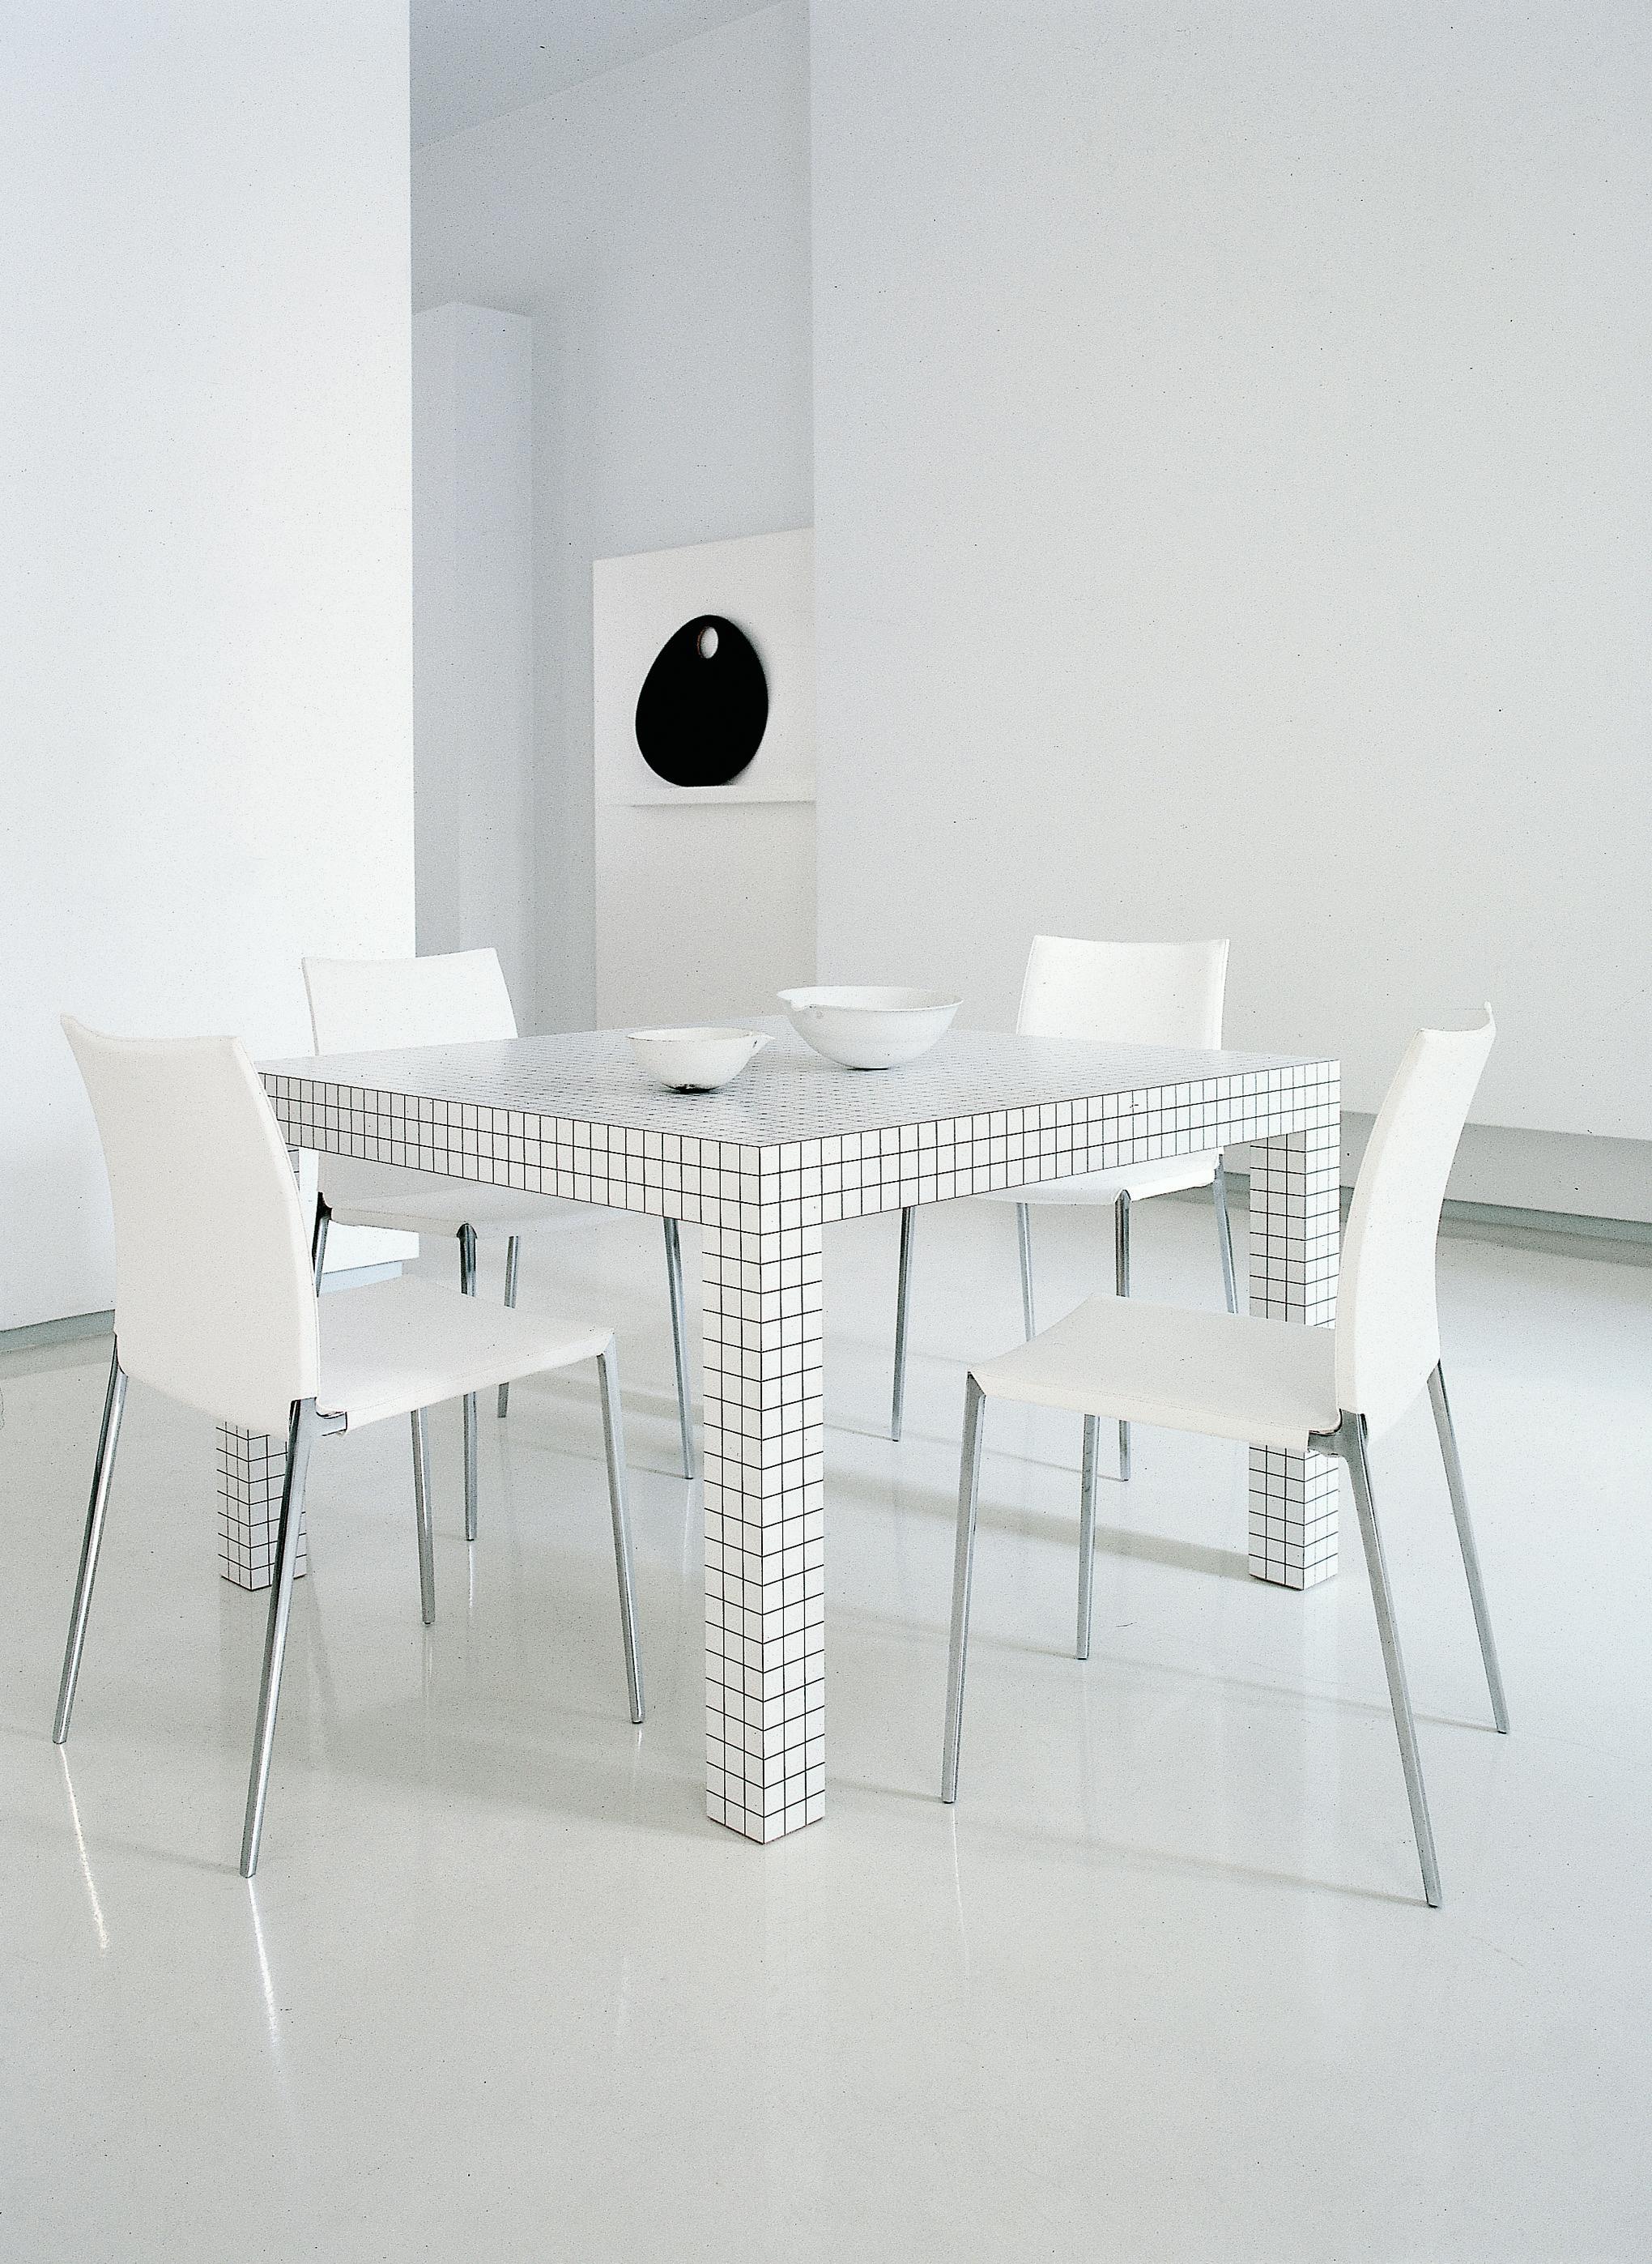 Zanotta Small Quaderna Table/Writing Desk in White Plastic Laminate, Superstudio

Honeycomb core structure coated with white plastic laminate, digitally printed with black squares at 1 3/16” spacing.

Additional Information:
Material: Plastic